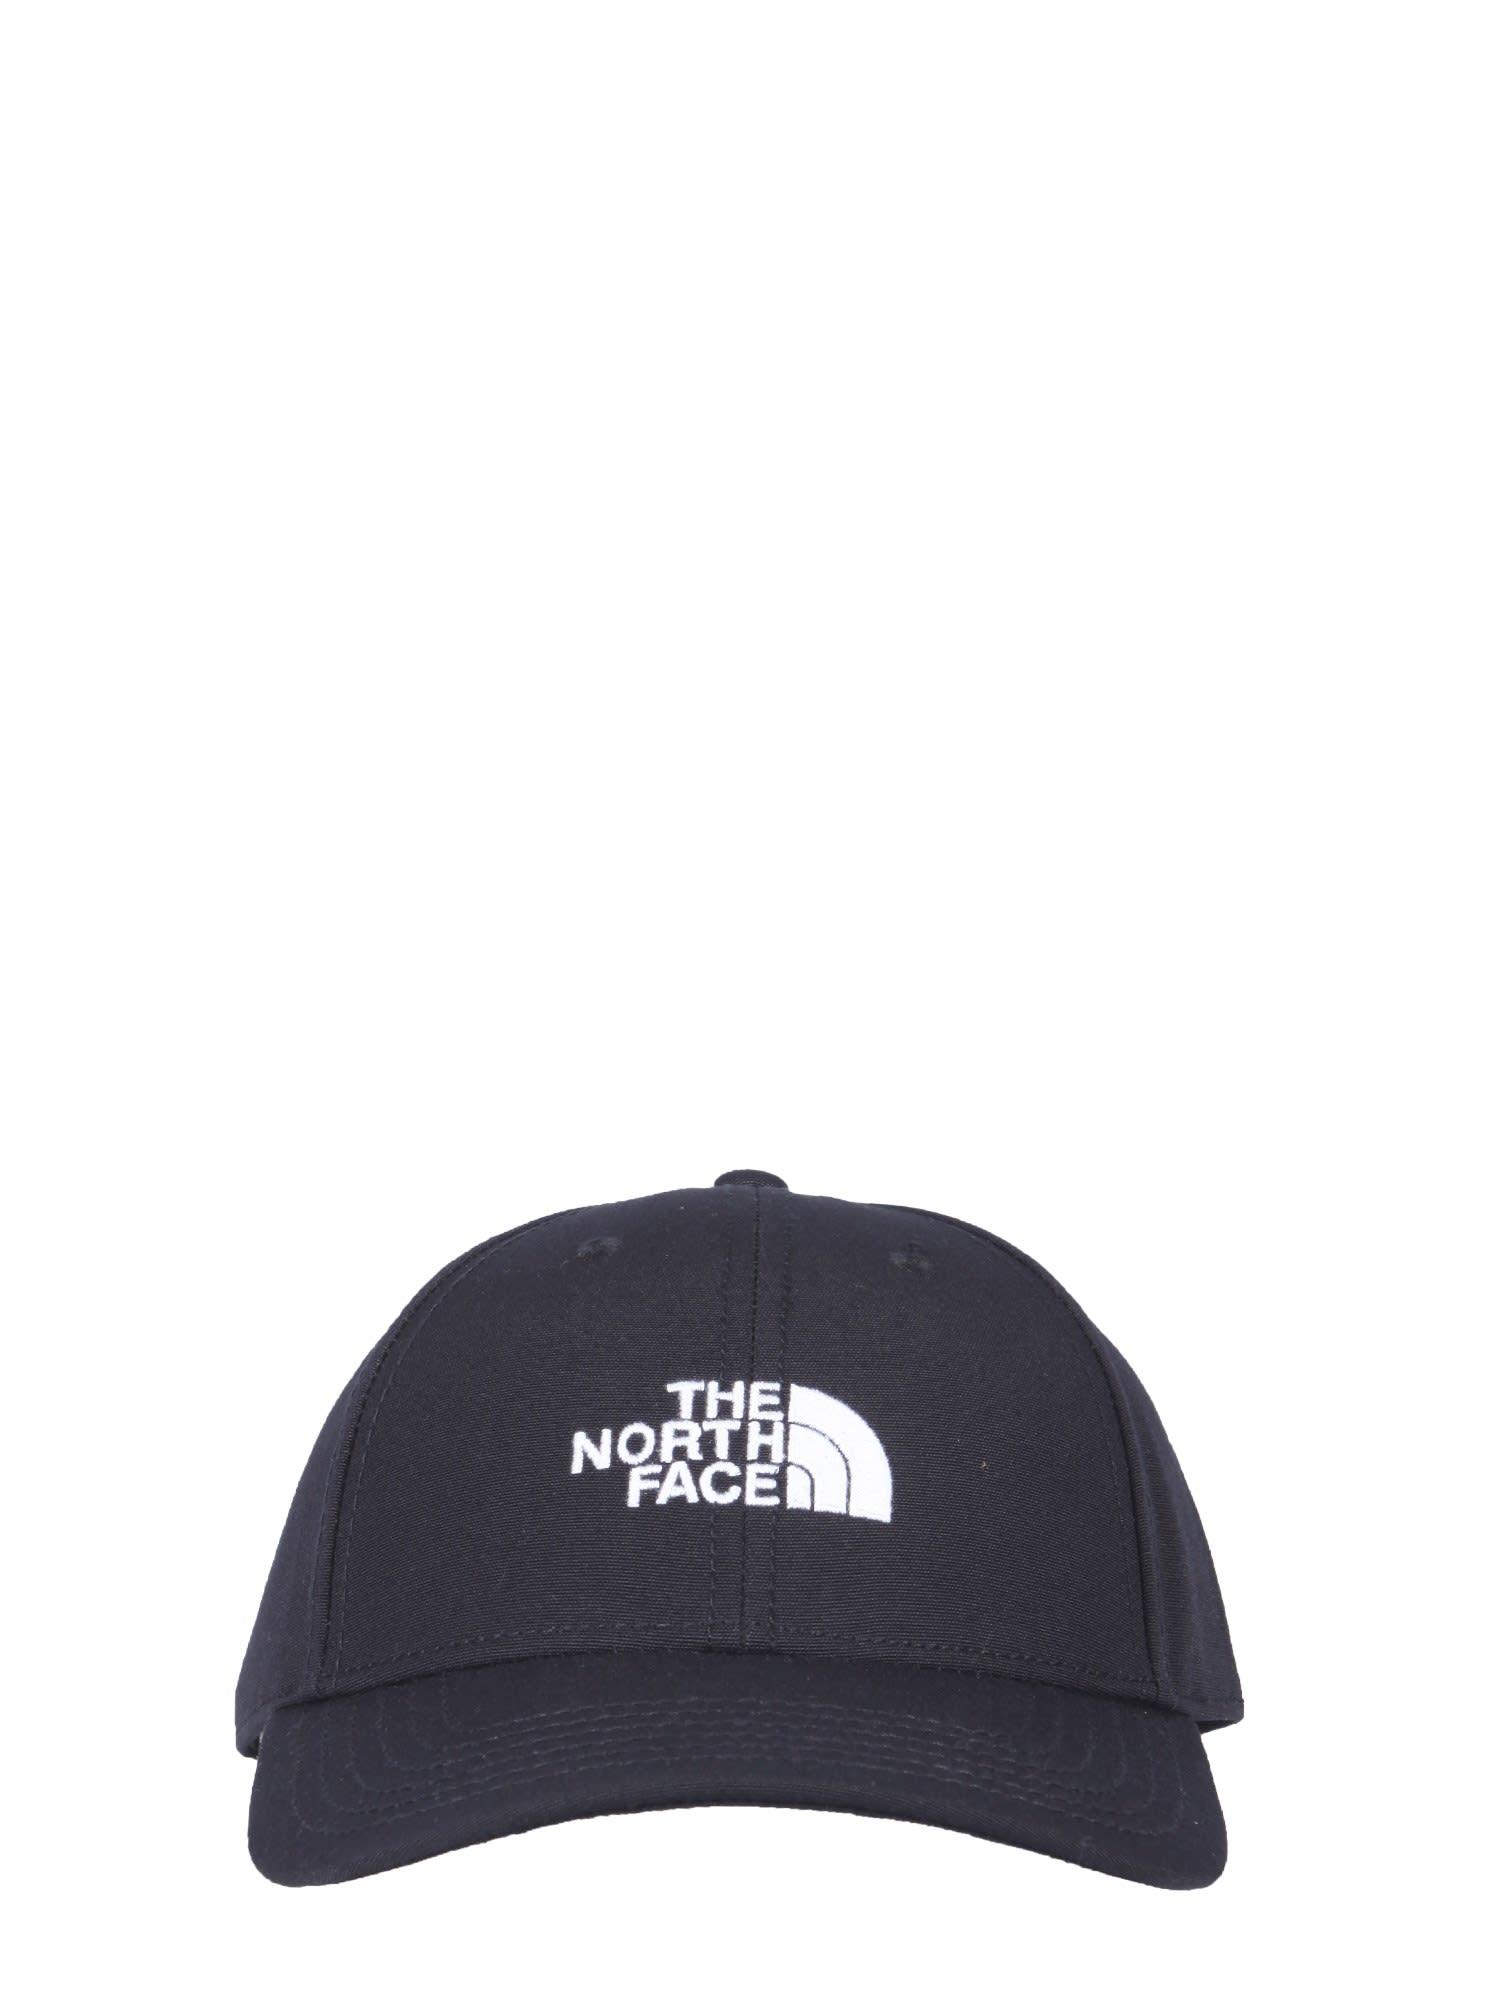 The North Face Other Materials Hat in Nero (Black) for Men - Save 71% | Lyst